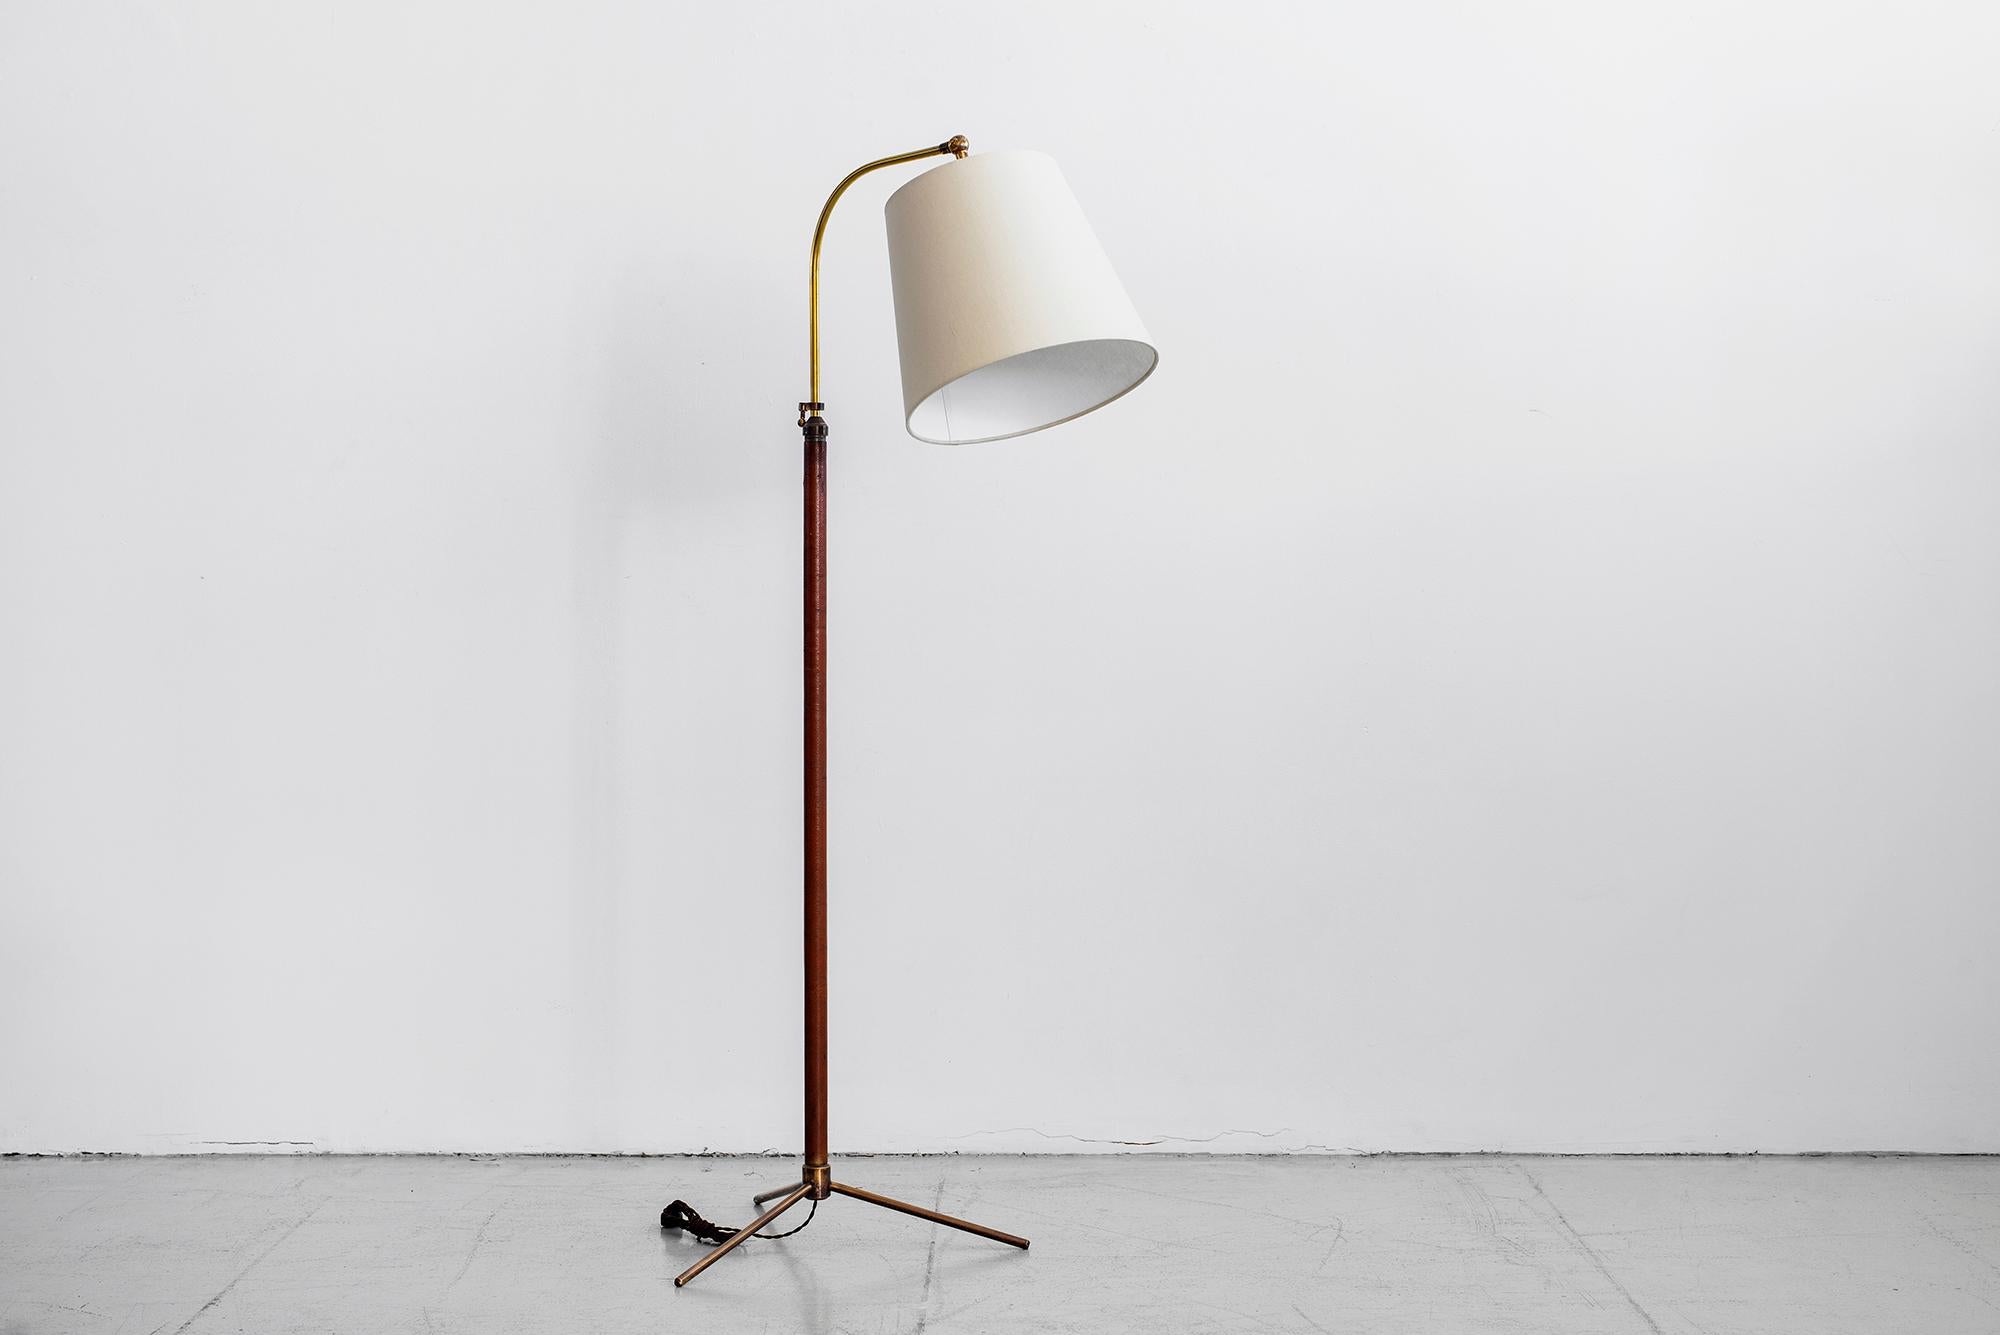 Handsome French floor lamp in the style of Jacques Adnet. Brass stem wrapped in saddle brown leather with contrast stitching and brass tripod base. Great age and patina. Shade pivots and brass neck is height adjustable. Newly re-wired with new shade.